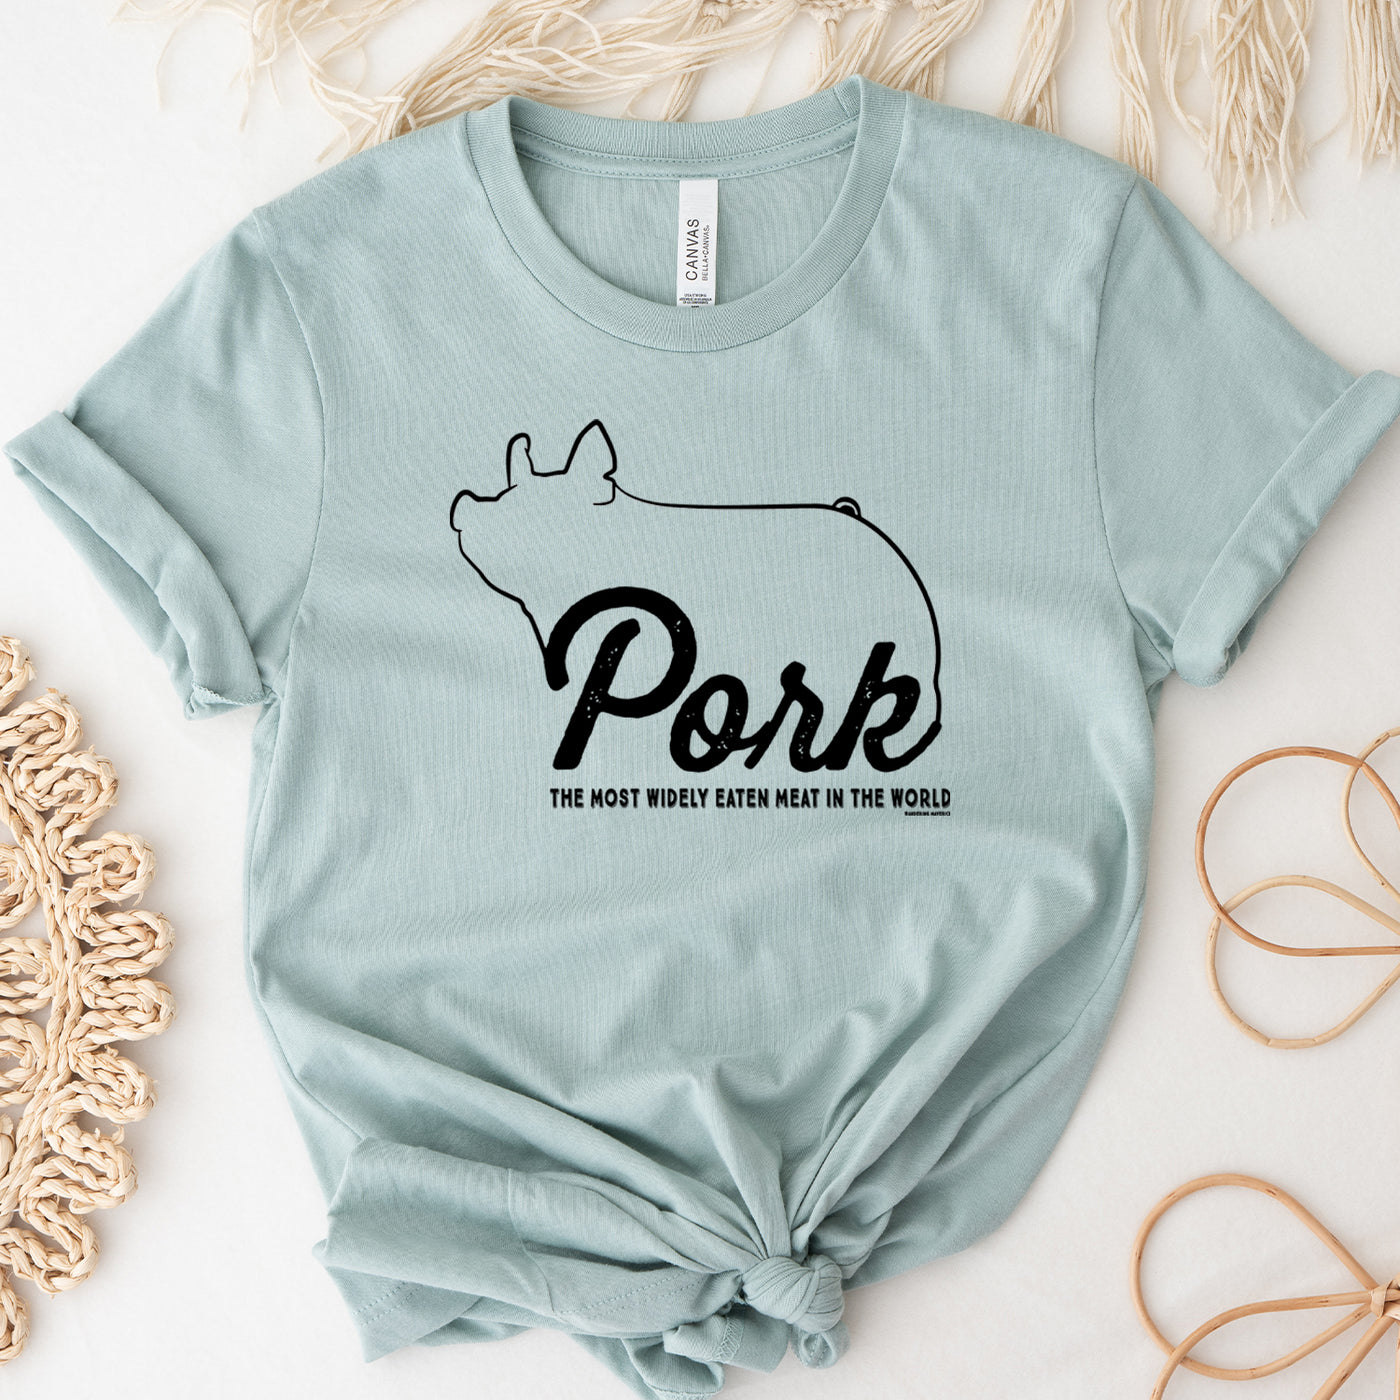 Pork - The Most Widely Eaten Meat In The World T-Shirt (XS-4XL) - Multiple Colors!